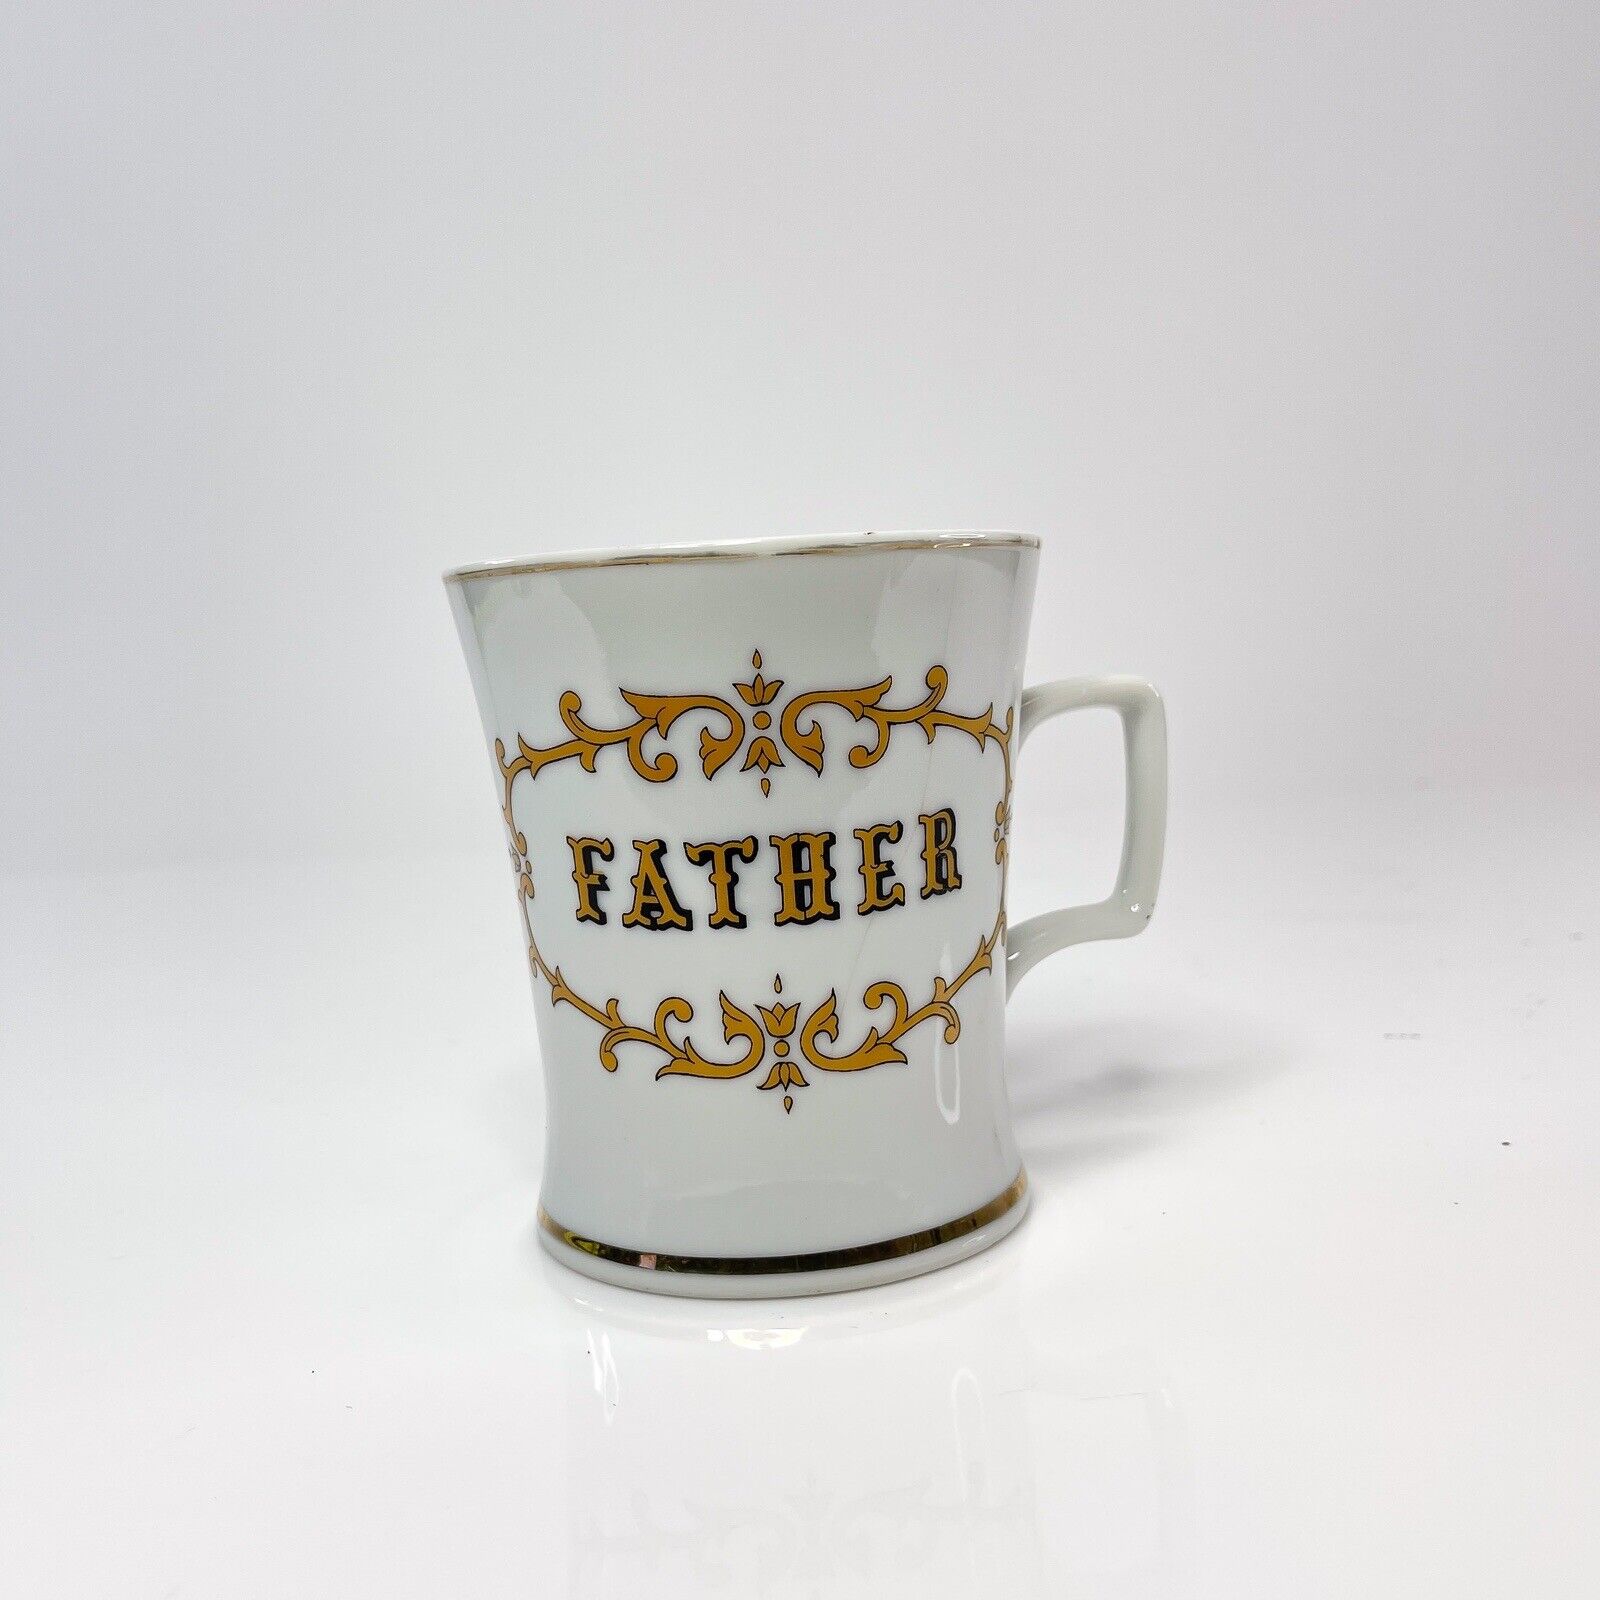 Vintage Coffee Mug - Father is Happiness White/Gold - Tea Collectable Art Retro